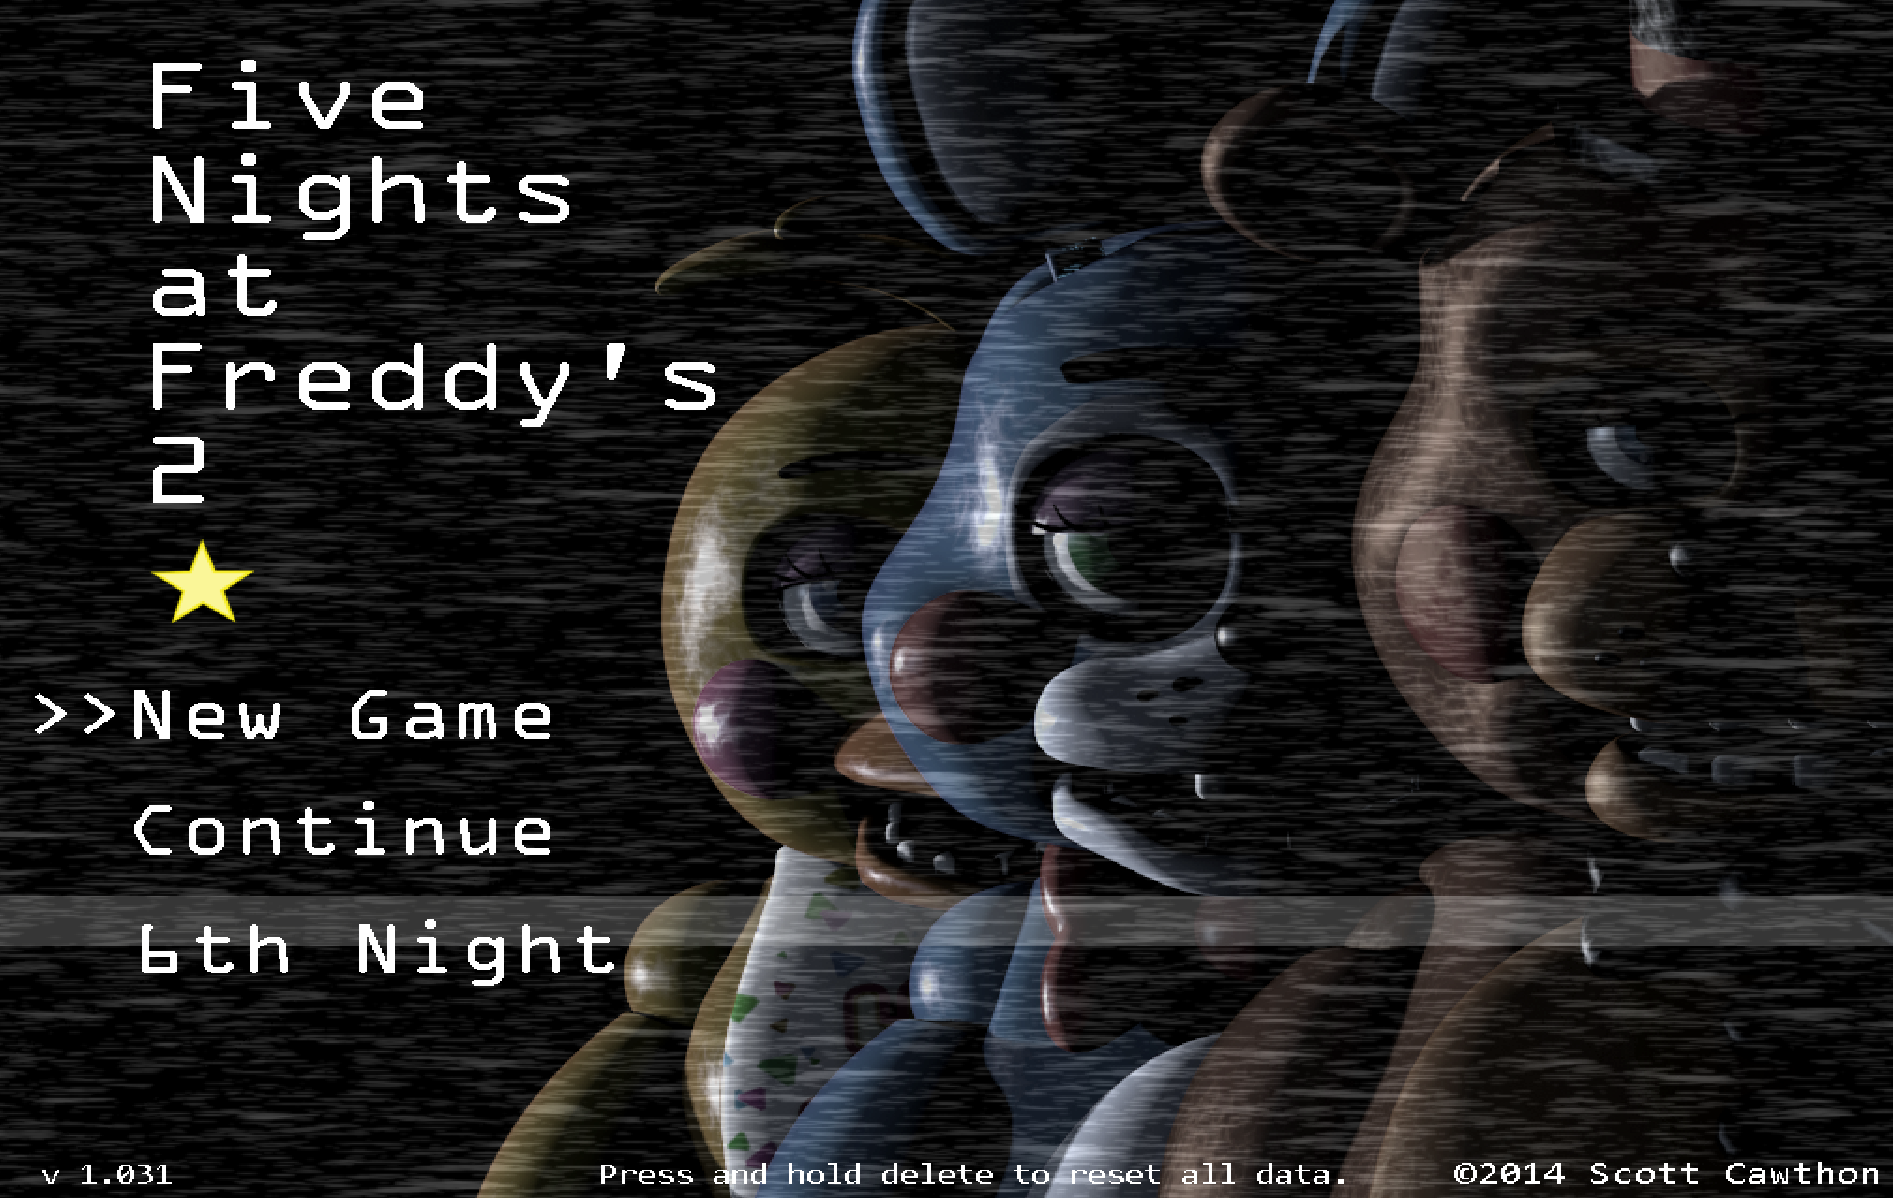 how do you shine the flashlight in five nights with 39